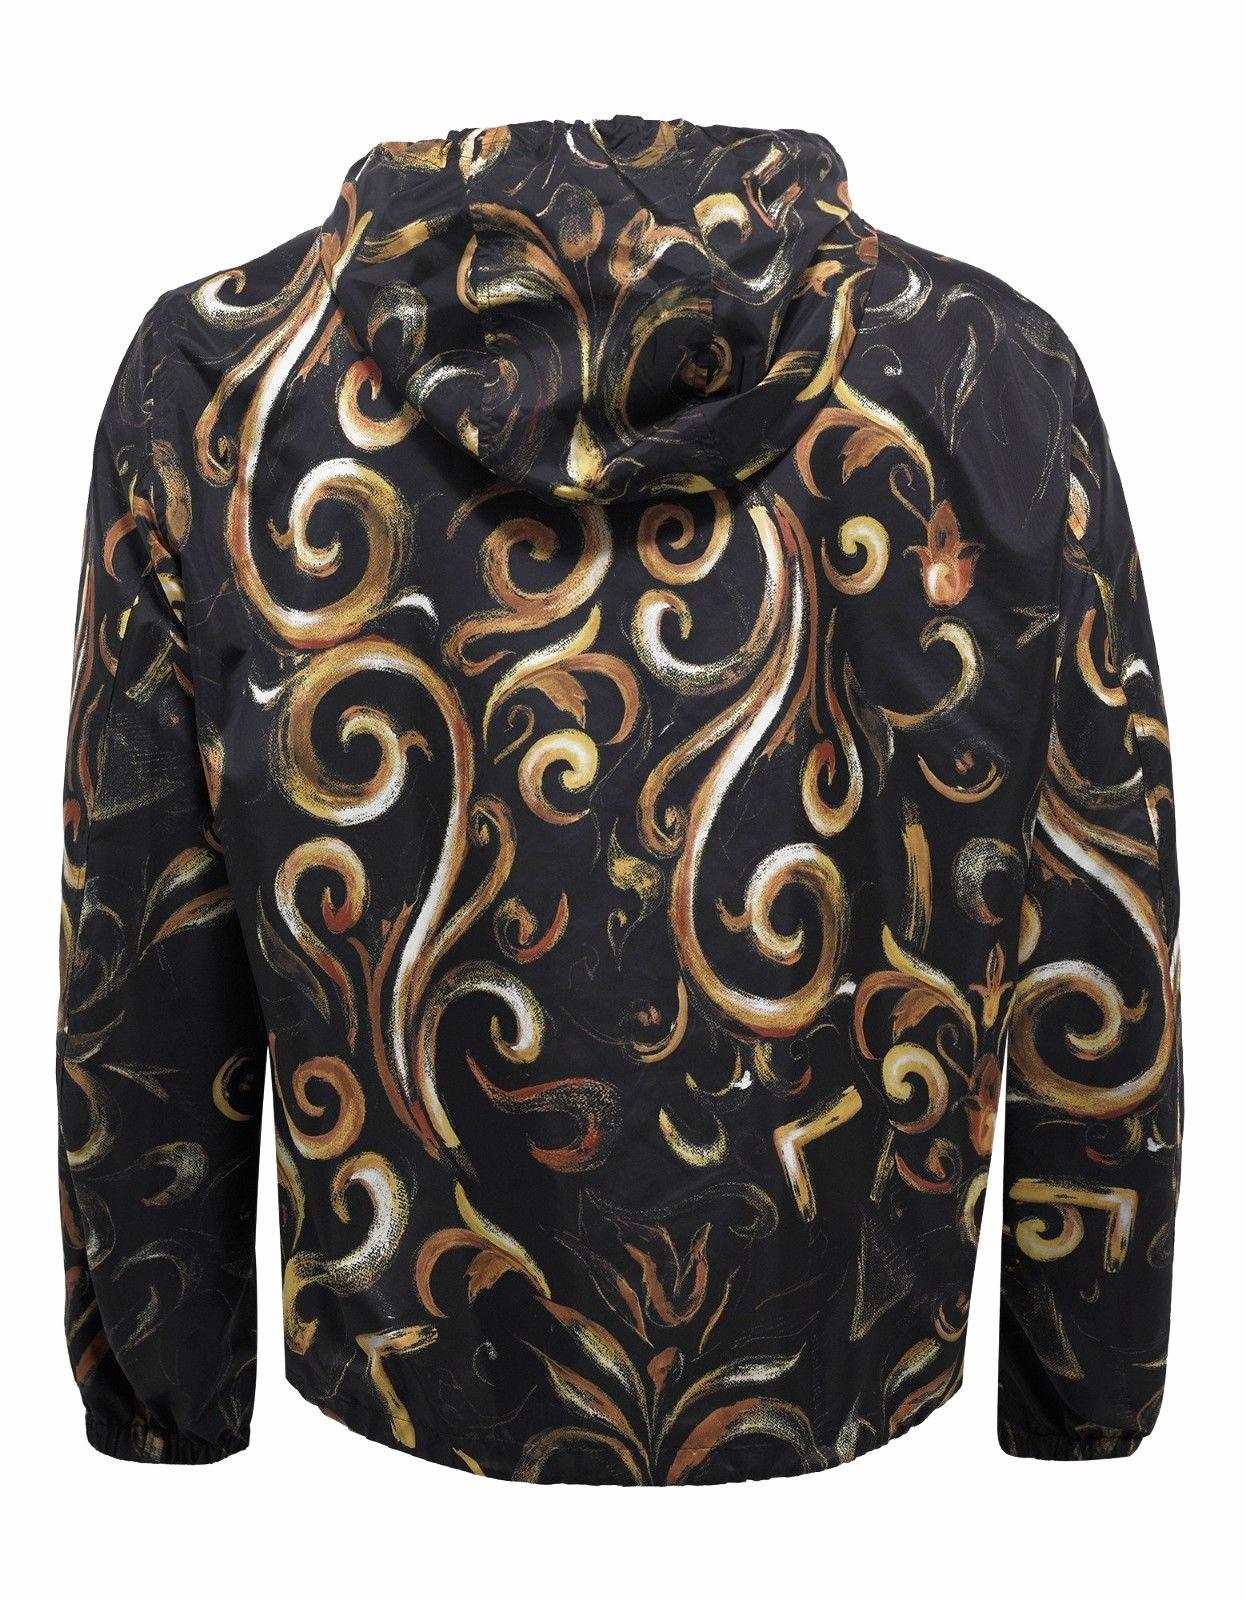 This hooded nylon jacket with front zip closure and drawstring accents features the Barocco Istante print - an interpretation of the iconic Versace motif intertwined in French Baroque style.
Designer size - 50 ( US 40)
Barocco Istante Print, Hooded,